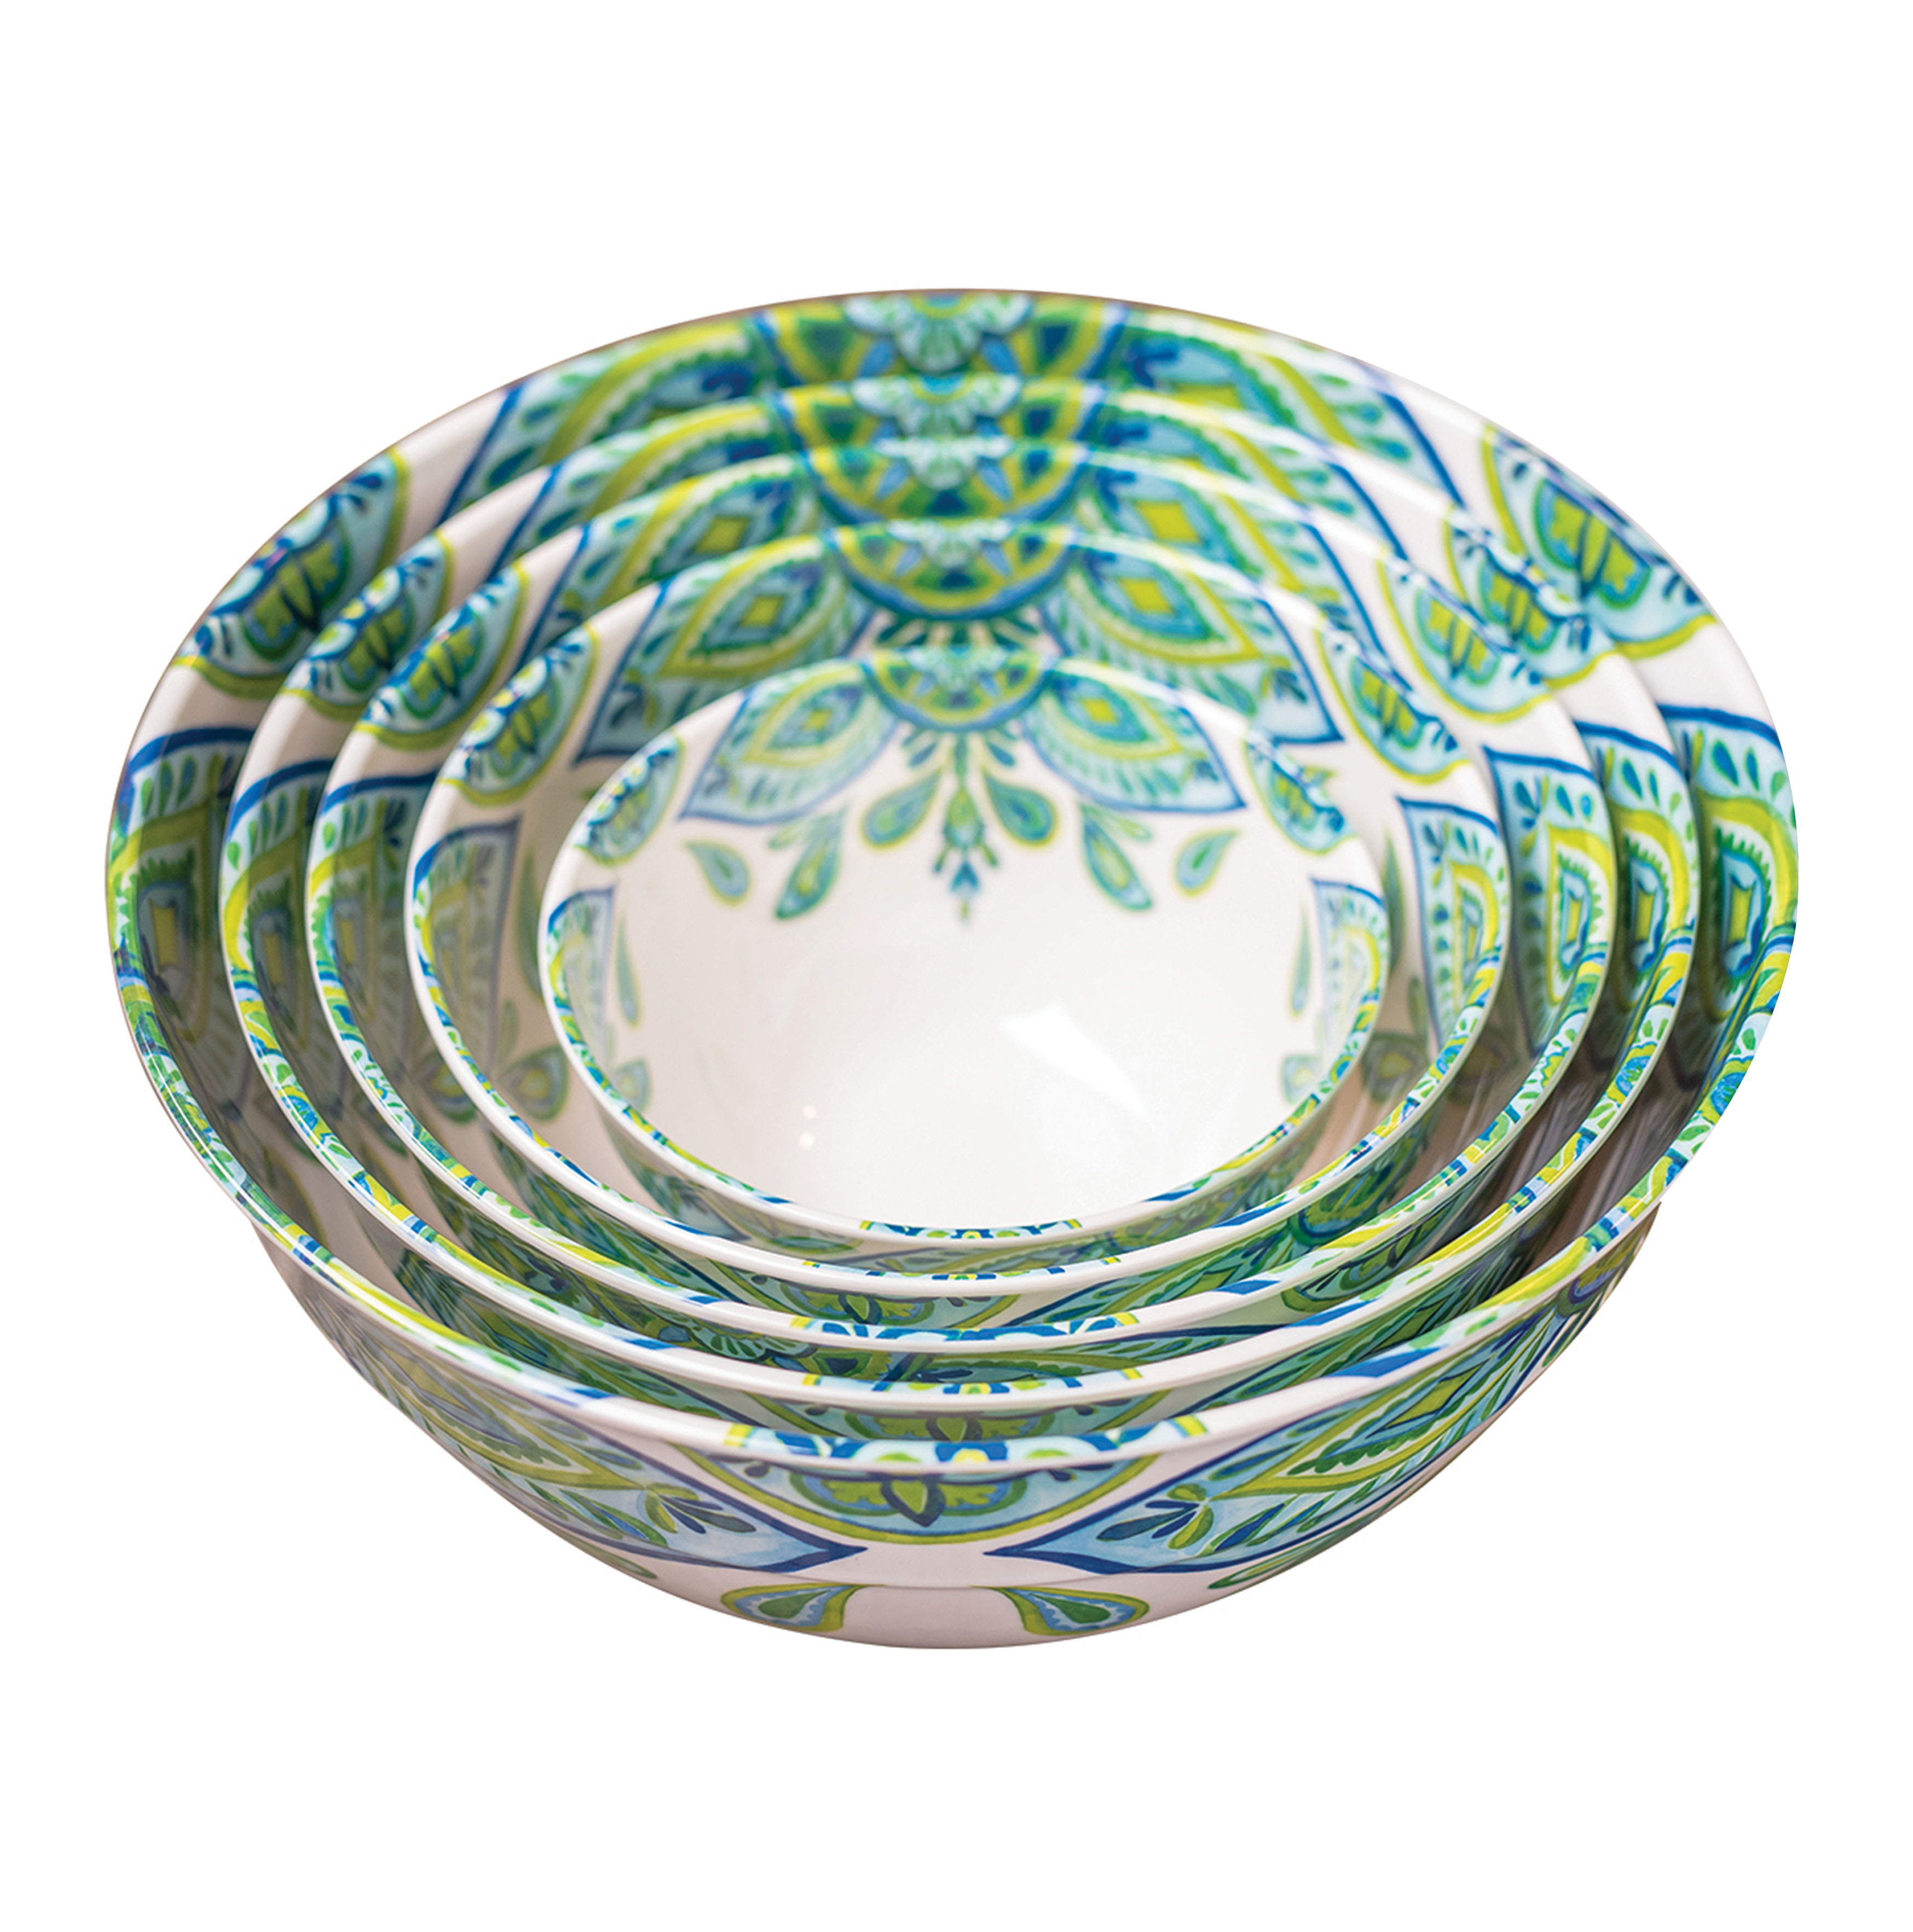 10 Piece Melamine Mixing Bowl Set with Lids, Green and Blue Floral - image 5 of 8